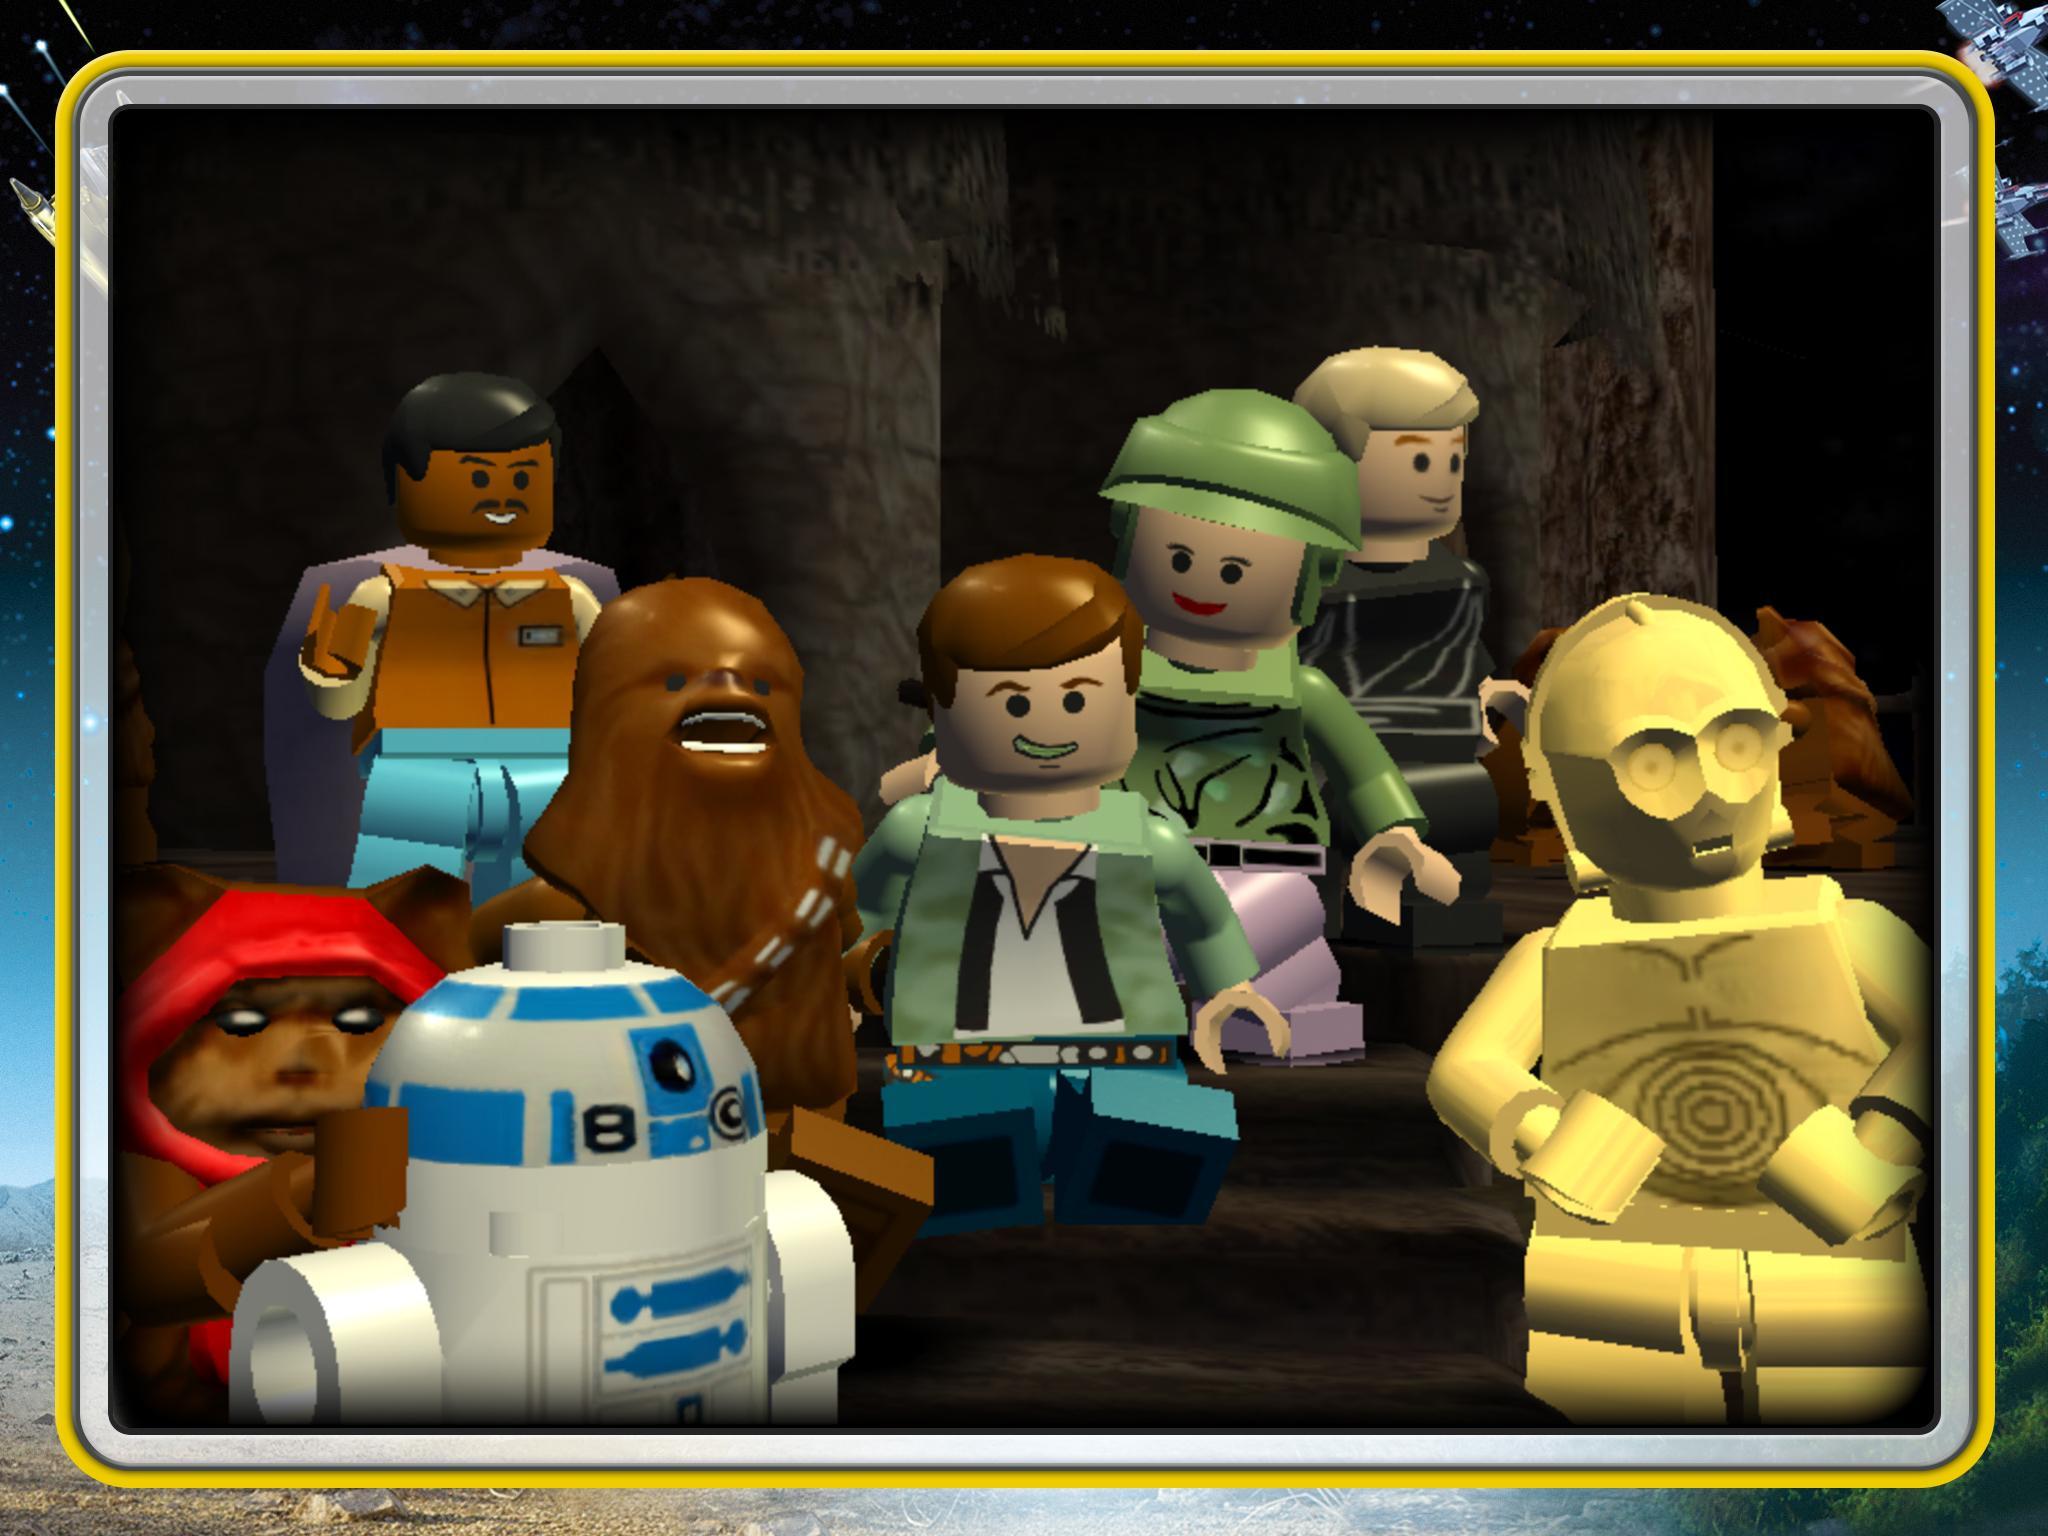 Best Lego® Star Wars APK (Android App) - Free Download